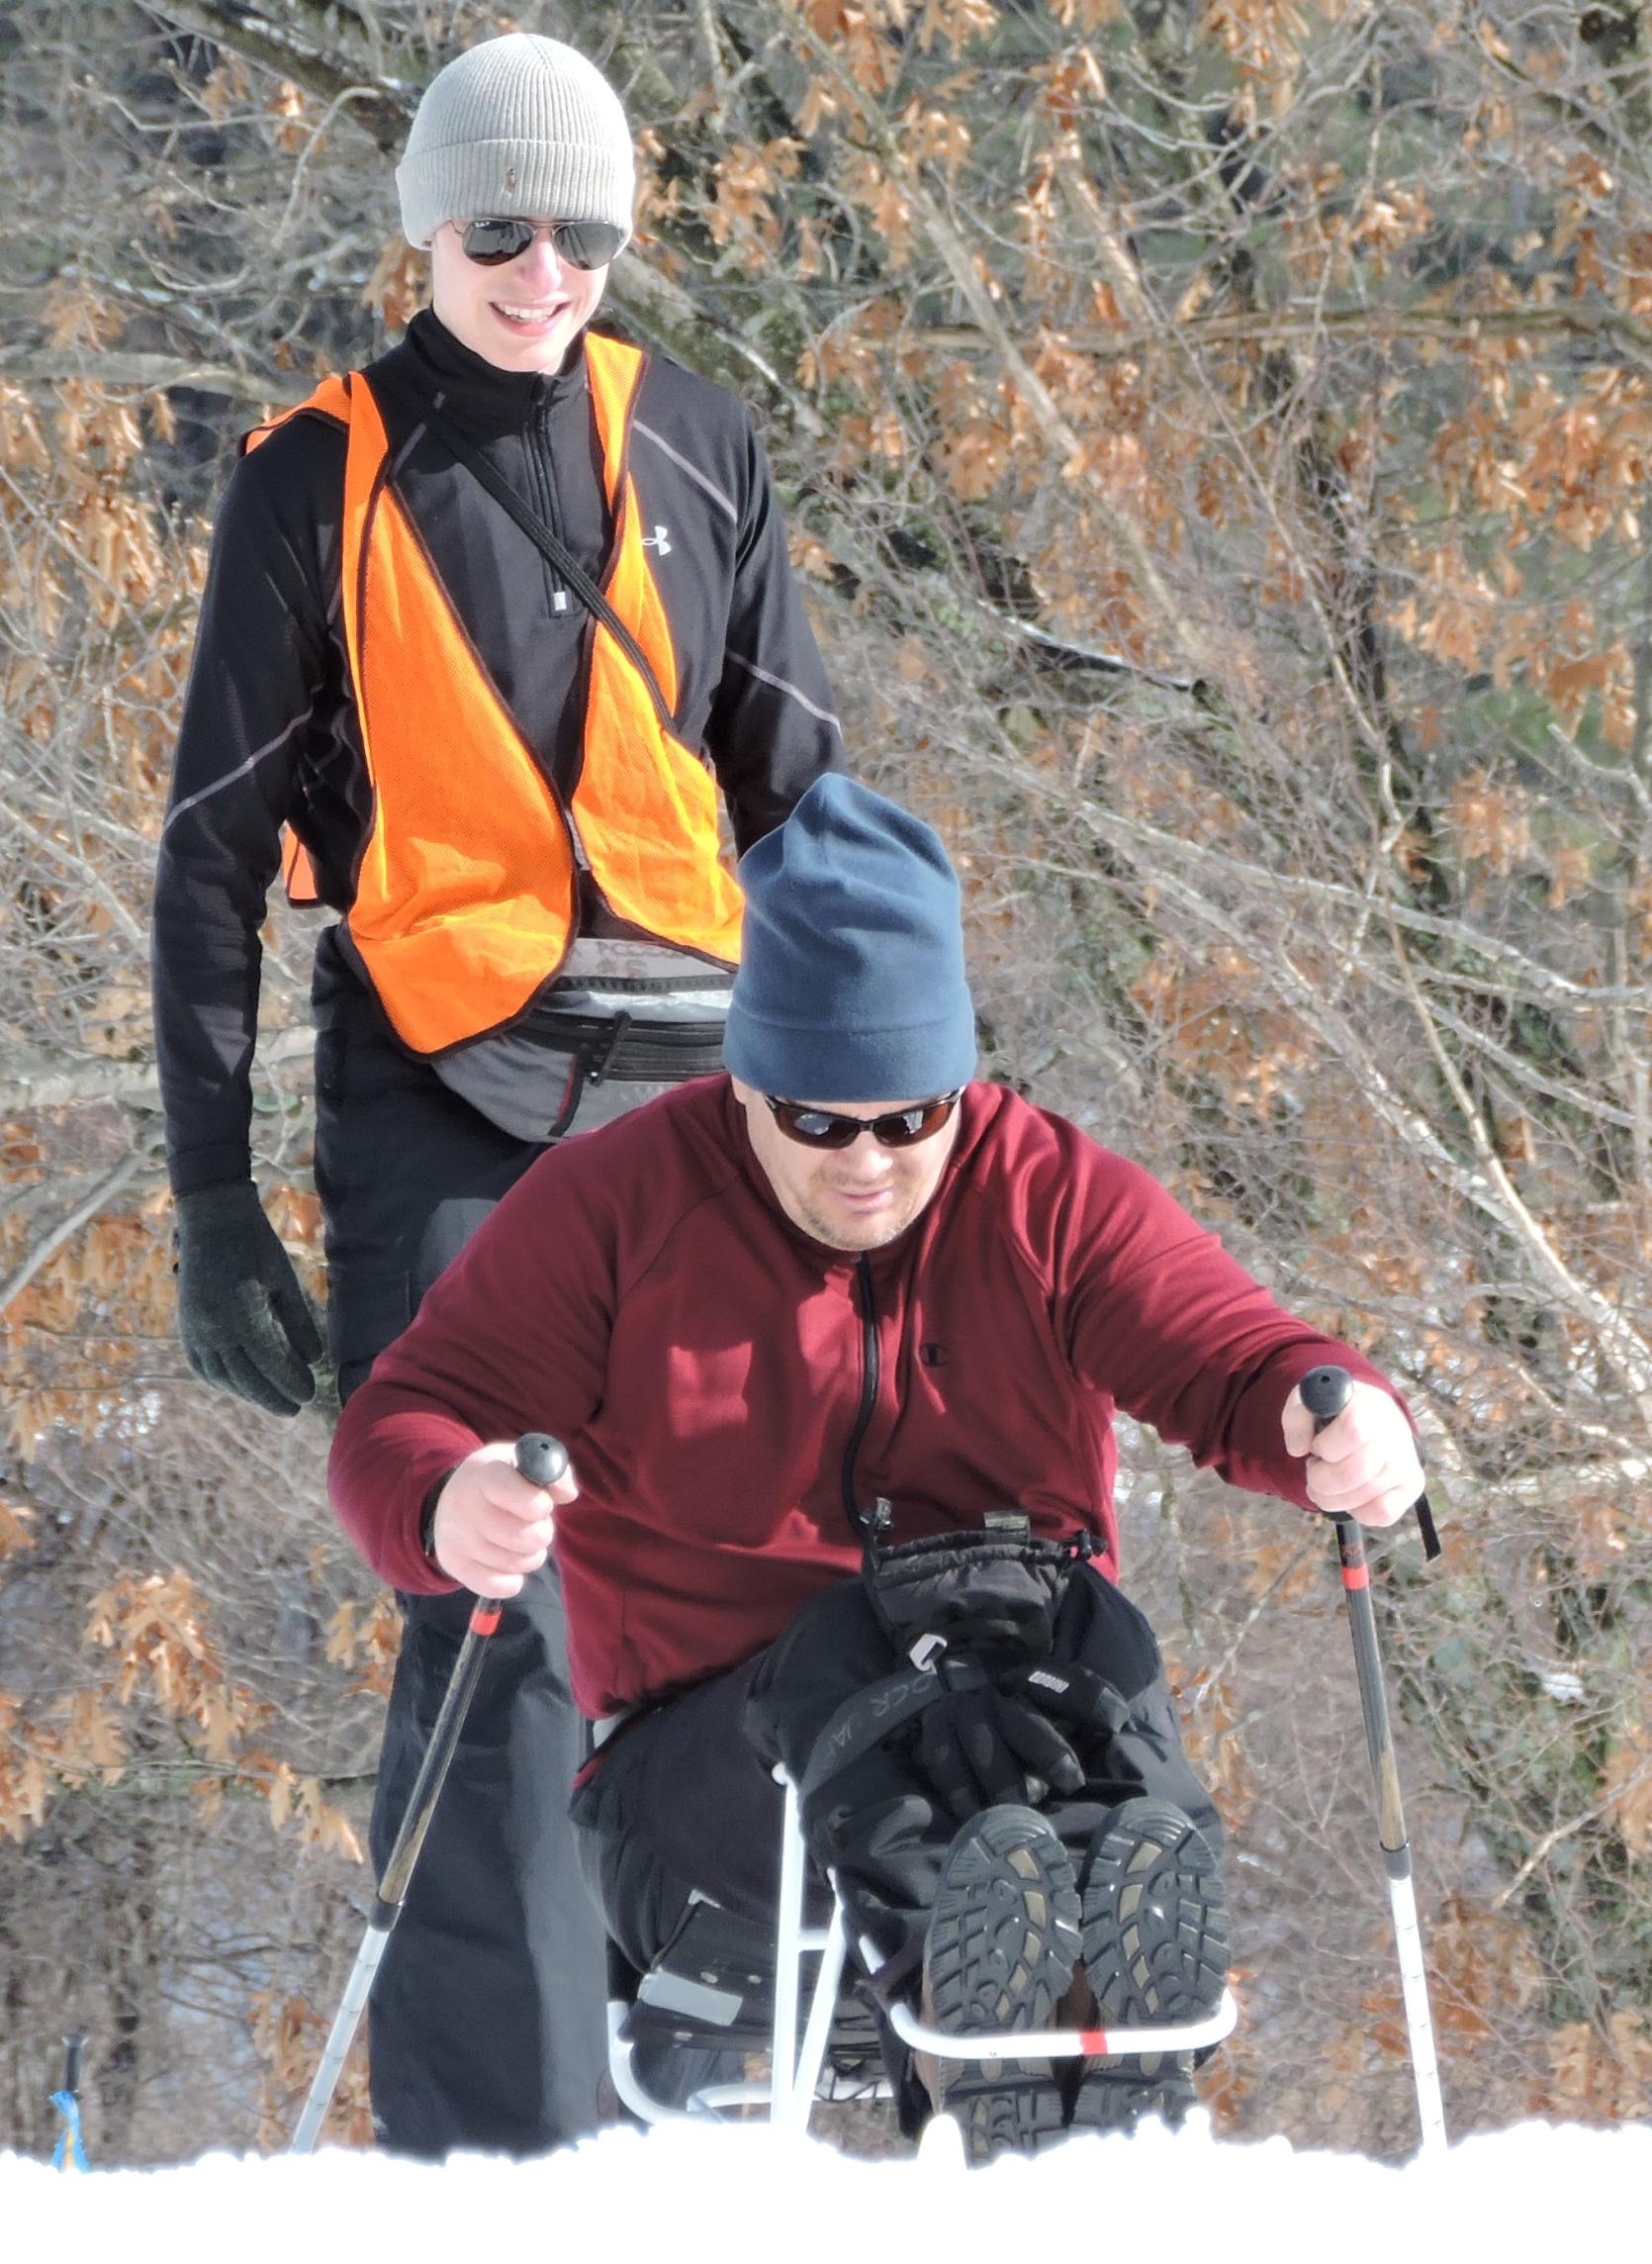 A man in a sit ski pushing himself up a slight hill using two short ski poles with another man walking behind him.